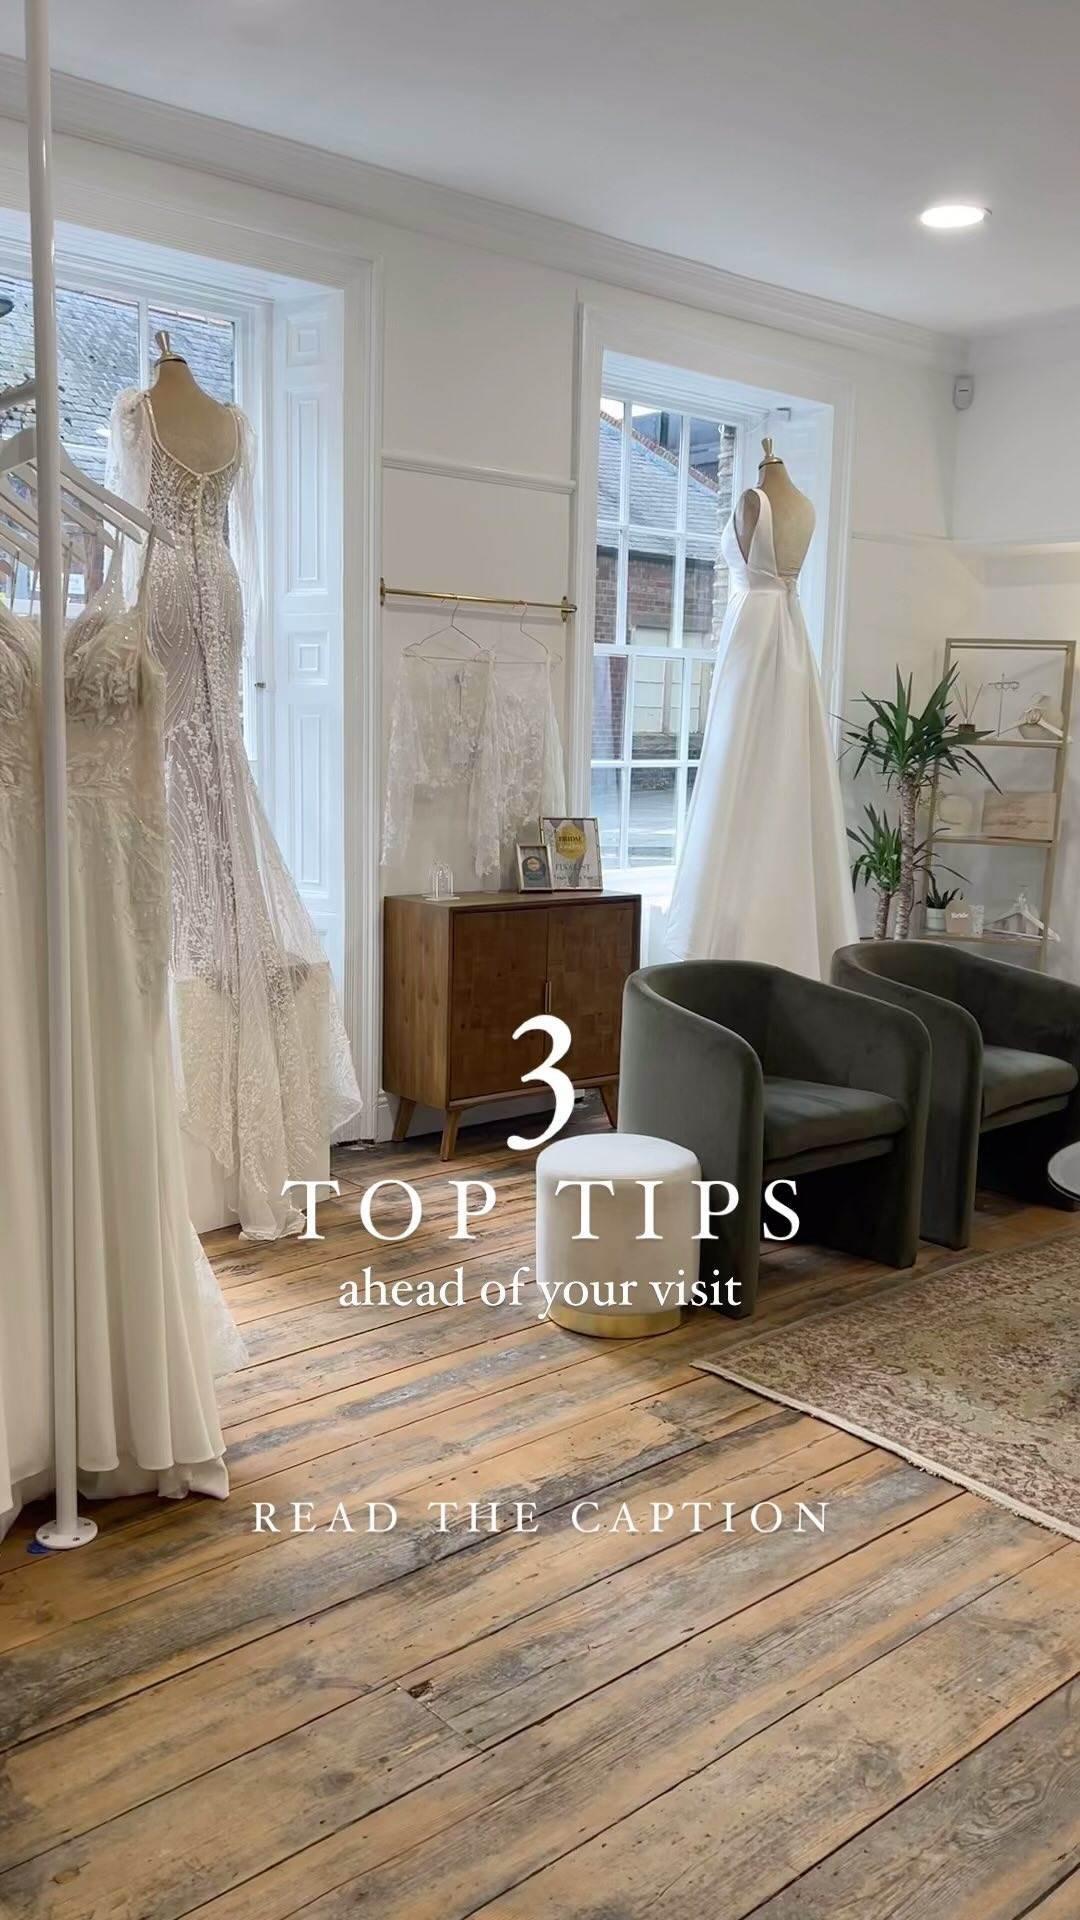 3 TOP TIPS ahead of your appointment to help elevate your bridal experience… ◊Take a look through our website & our Instagram highlights where you can find all of our gowns instore listed by Bridal Designer - SCREENSHOT your faves ready to chat through your ideas with your soul sister stylist at your appointment ◊Come with an OPEN MIND - this is key as your ideas on dress design features that you’re liking or not liking will evolve during your dress journey with us instore - use your stylists knowledge of our gowns to guide you throughout - it’s what we’re here for & beyond passionate about finding you your dream dress match ◊A really important one is to CHOOSE your guests wisely - your dream wedding dress should be an exciting decision to make with your closest family or friends … you want to feel supported, hyped for all the right reasons & most importantly you want to feel heard - this is about how your dress makes YOU feel not how somebody expects you should look ◊Hit SAVE on these top tips ahead of planning your visit to find your precious dress ◊#youarepreciousbridal #bridalstudio #newcastlebride #bride #bridalgown #bridalinspo #weddingdress #bride2025 #2025bride #bride2026 #bridalstyle #stylishbride  #bohobride #modernbride #yestothedress #youarepreciousloves #dressoftheday #isaidyes #weddingdressgoals #dressgoals #dreamweddingdress #designerbridal #elegantwedding #weddingplanning #weddingplanningtips #bridetobetips #toptips